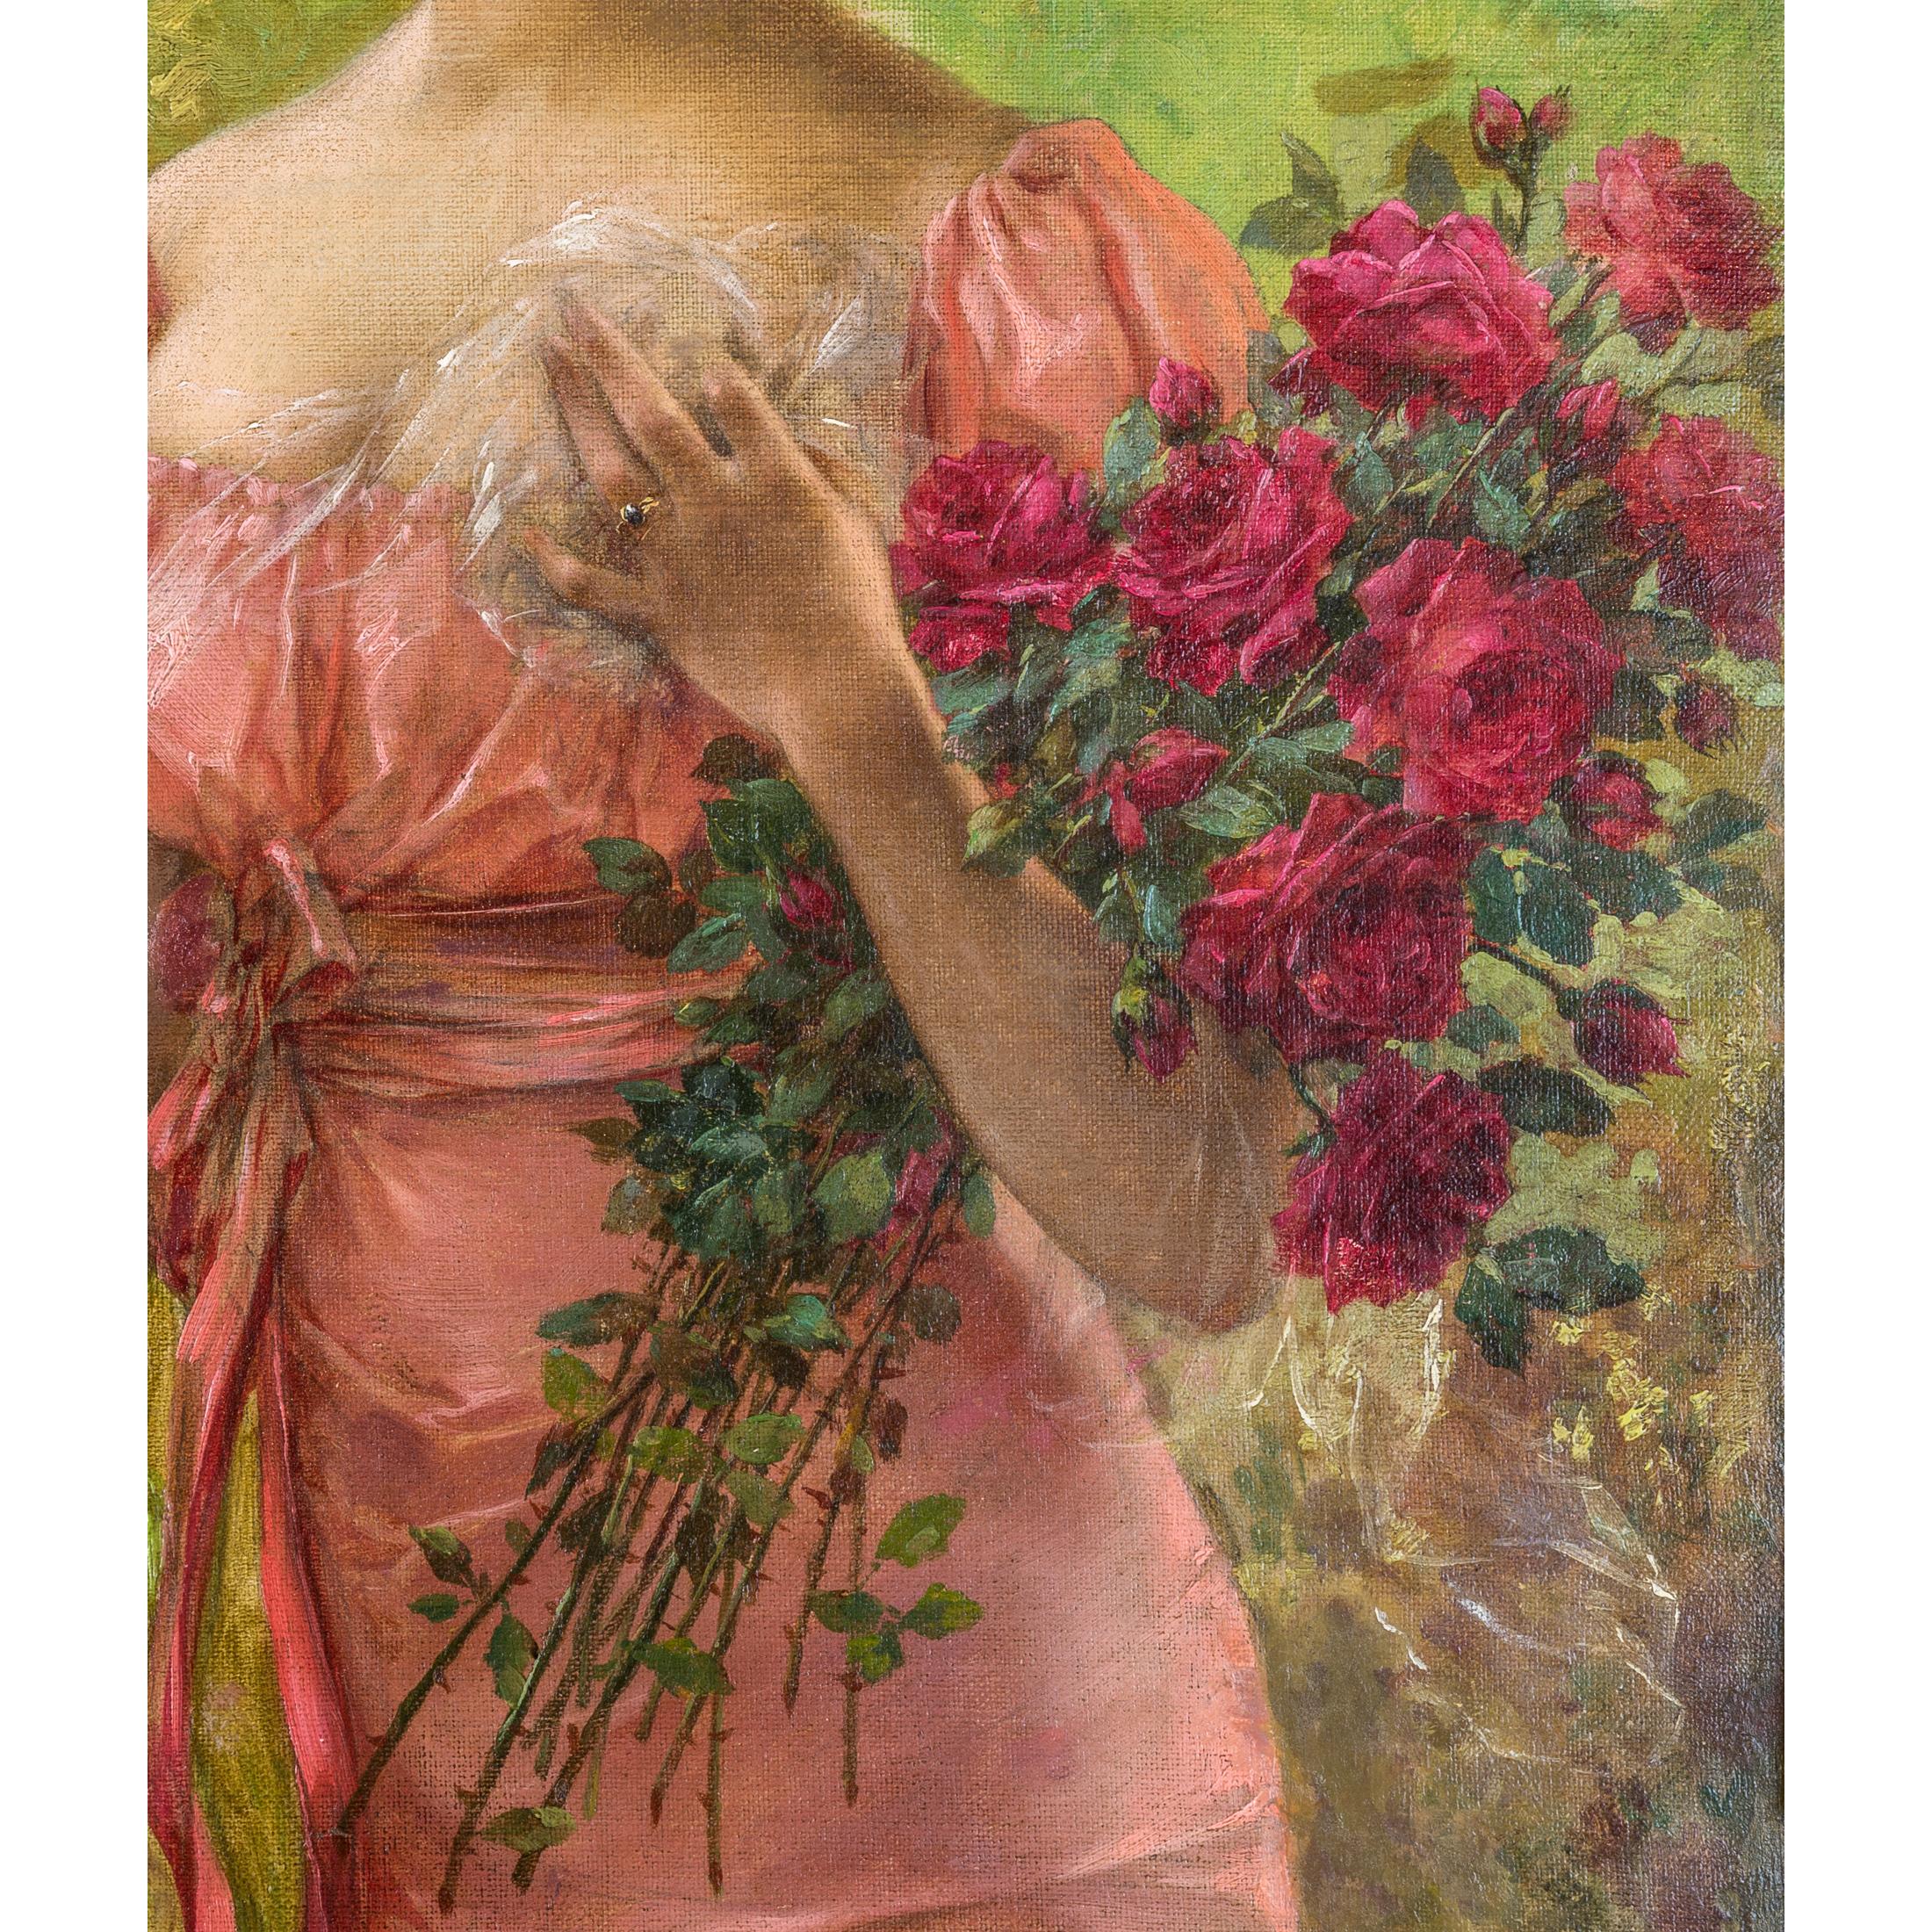 Portrait of a Young Beauty Holding a Bouquet of Roses by Emile Vernon 1